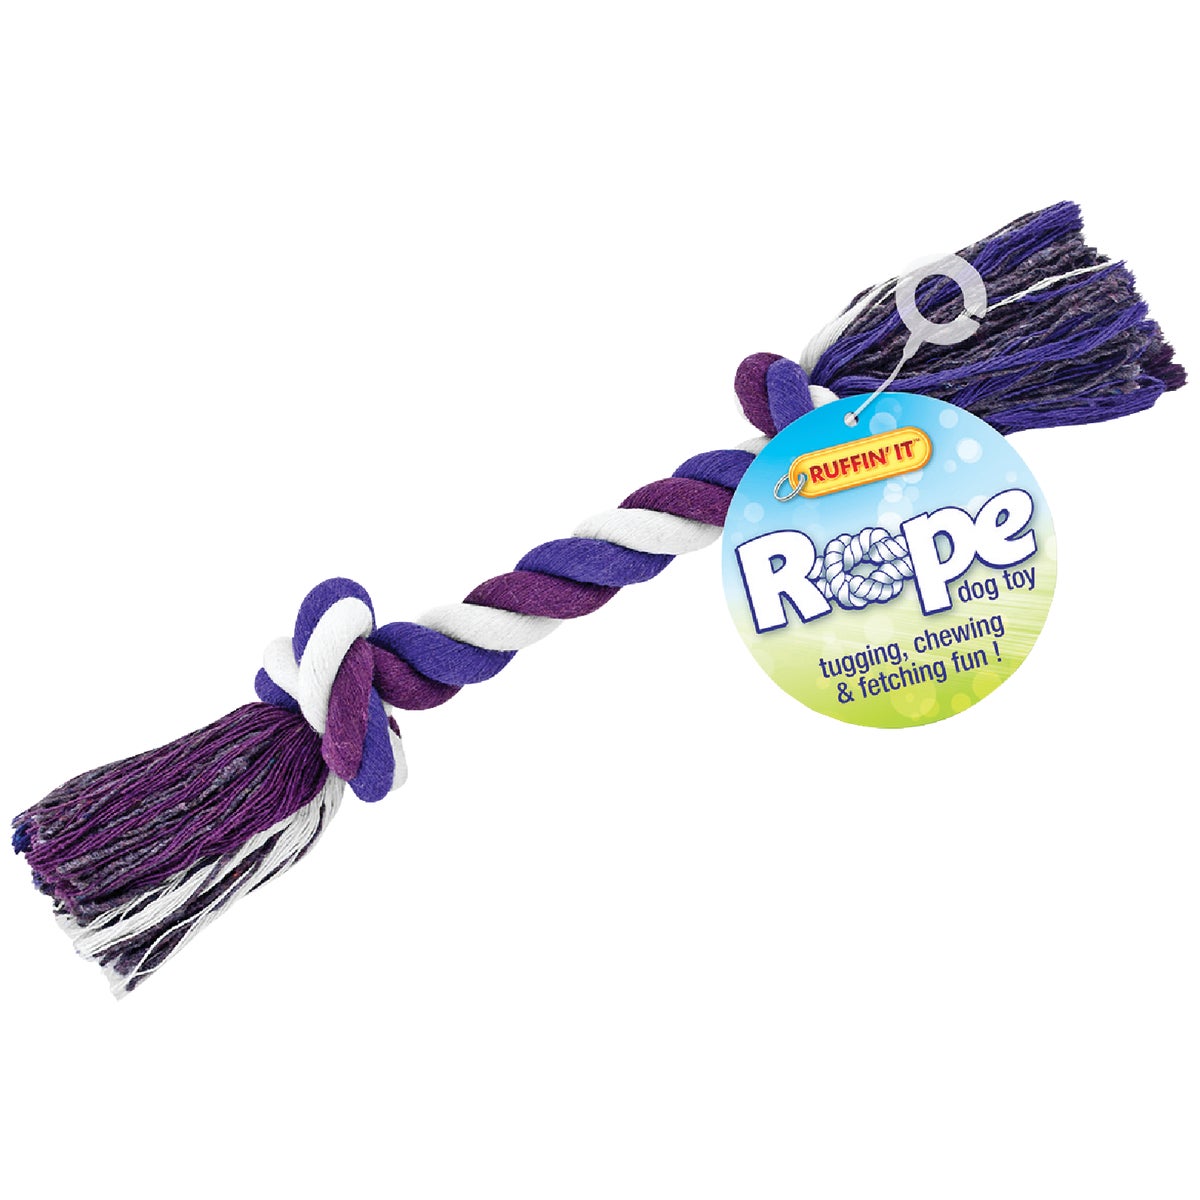 Item 810199, Durable rope tug dog toy. Provides long lasting play time.